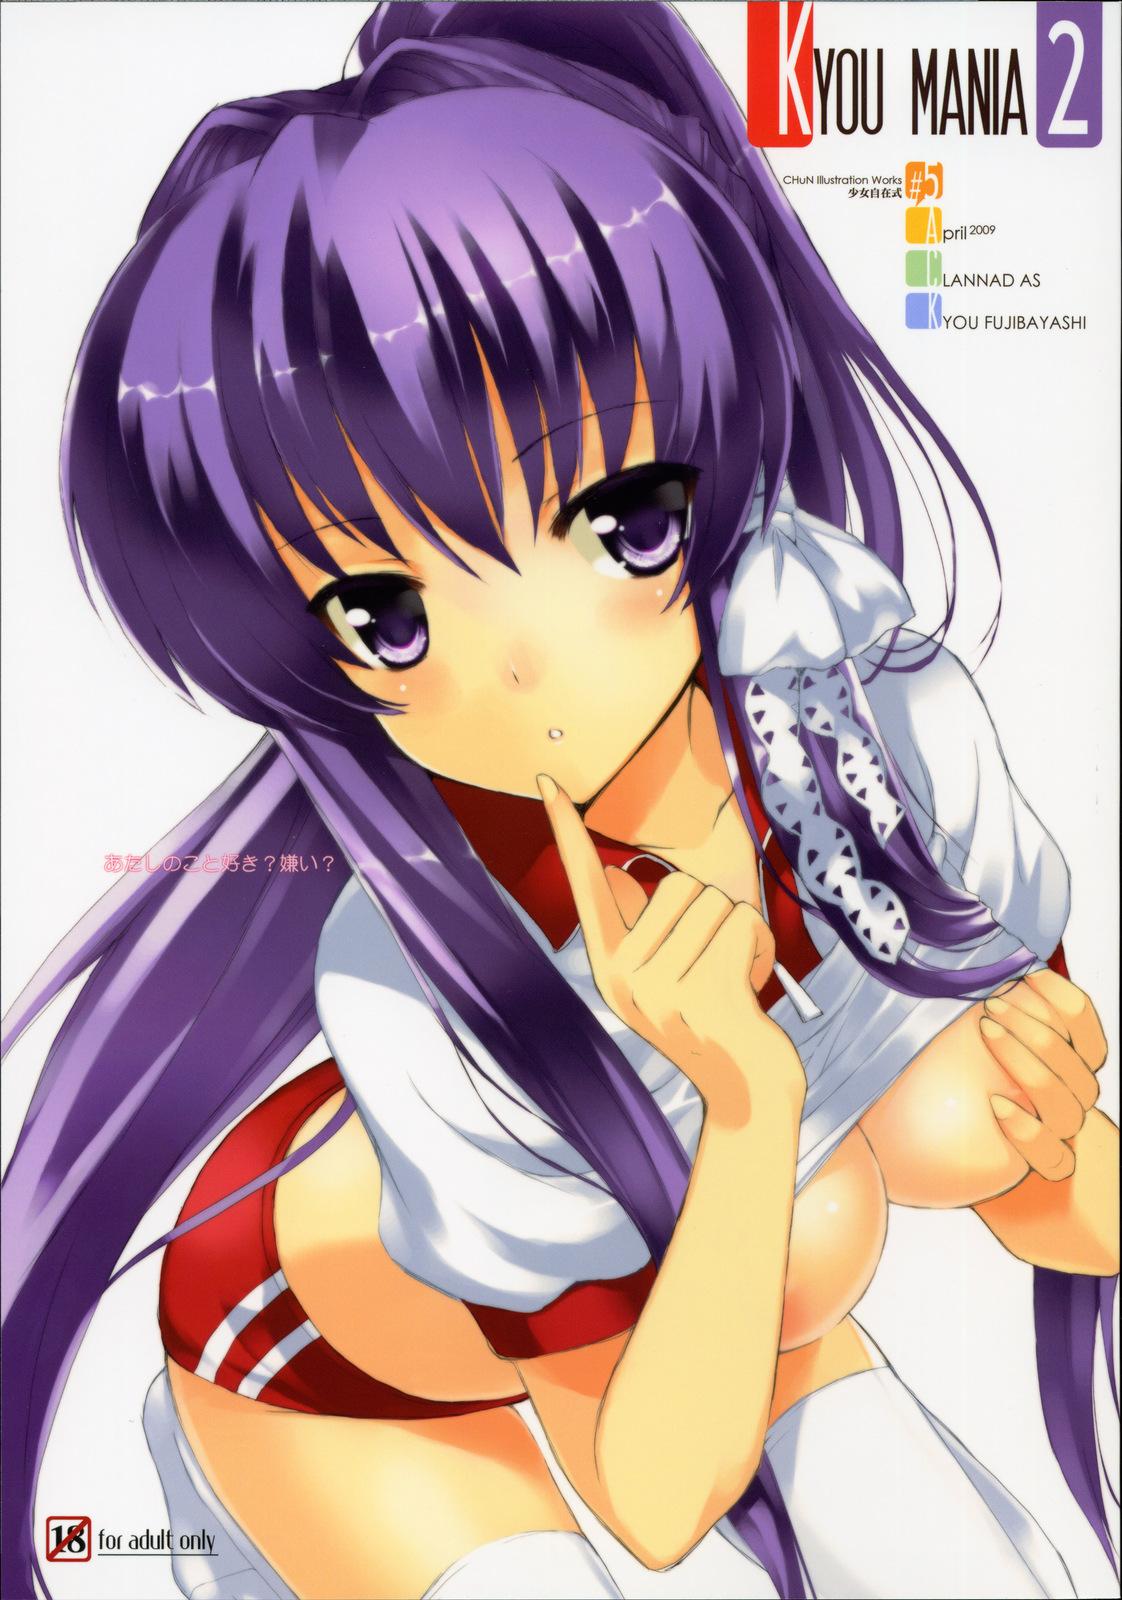 Love Making KYOU MANIA 2 - Clannad Colombia - Picture 1